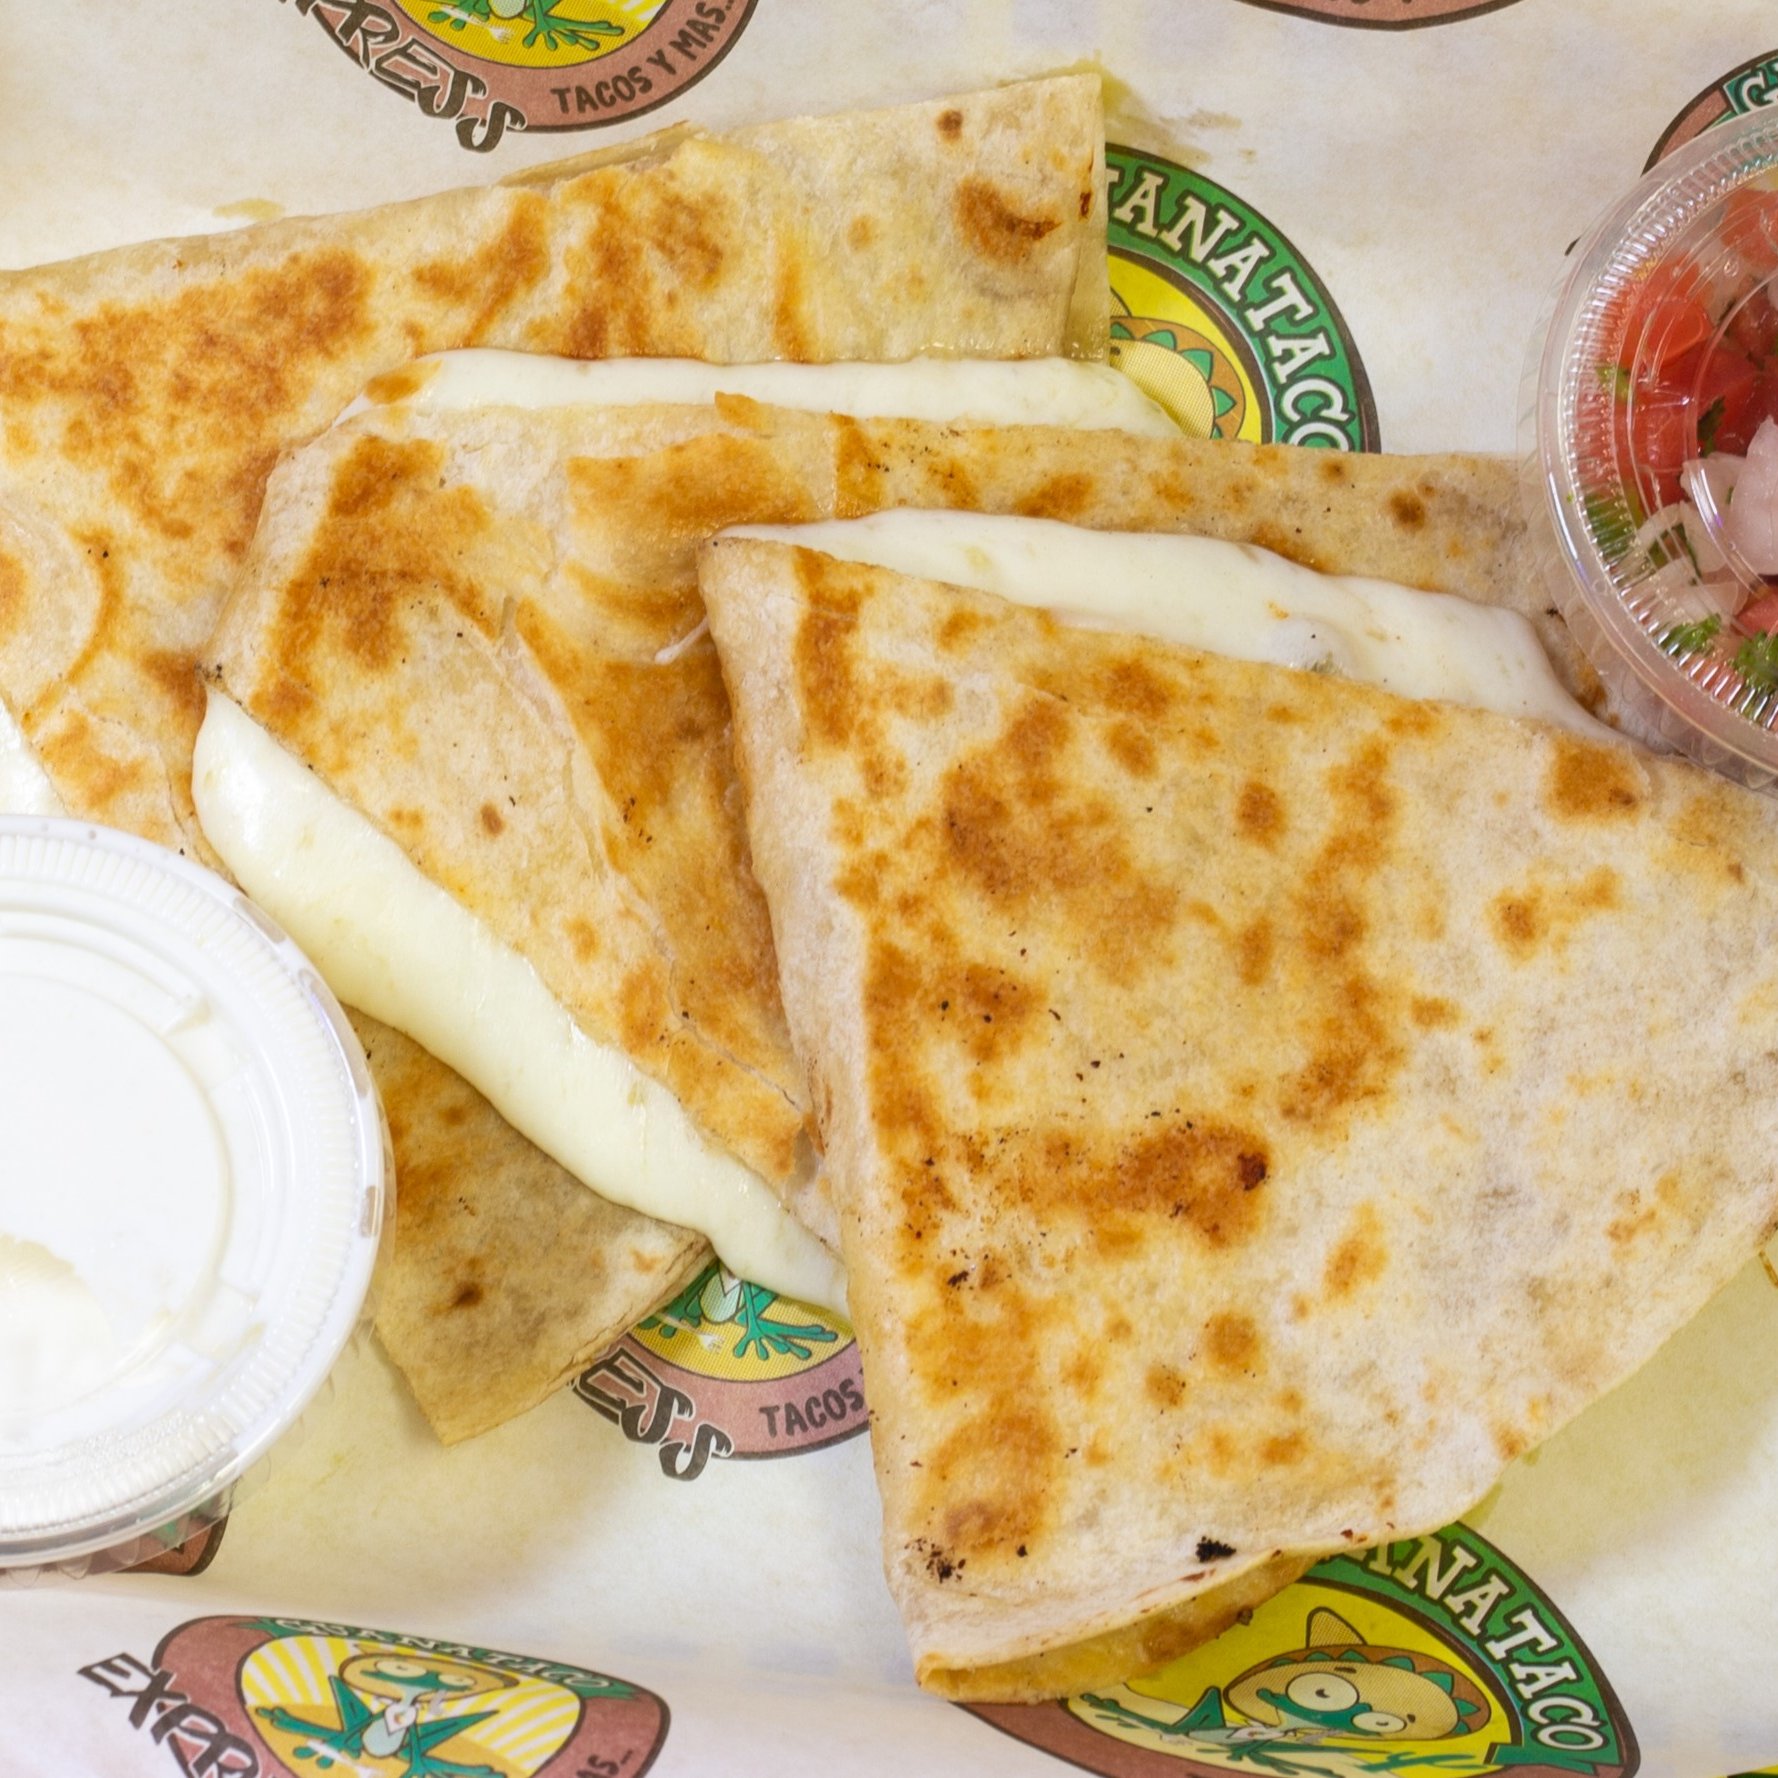 Delicious Quesadilla Options at Our Mexican Restaurant